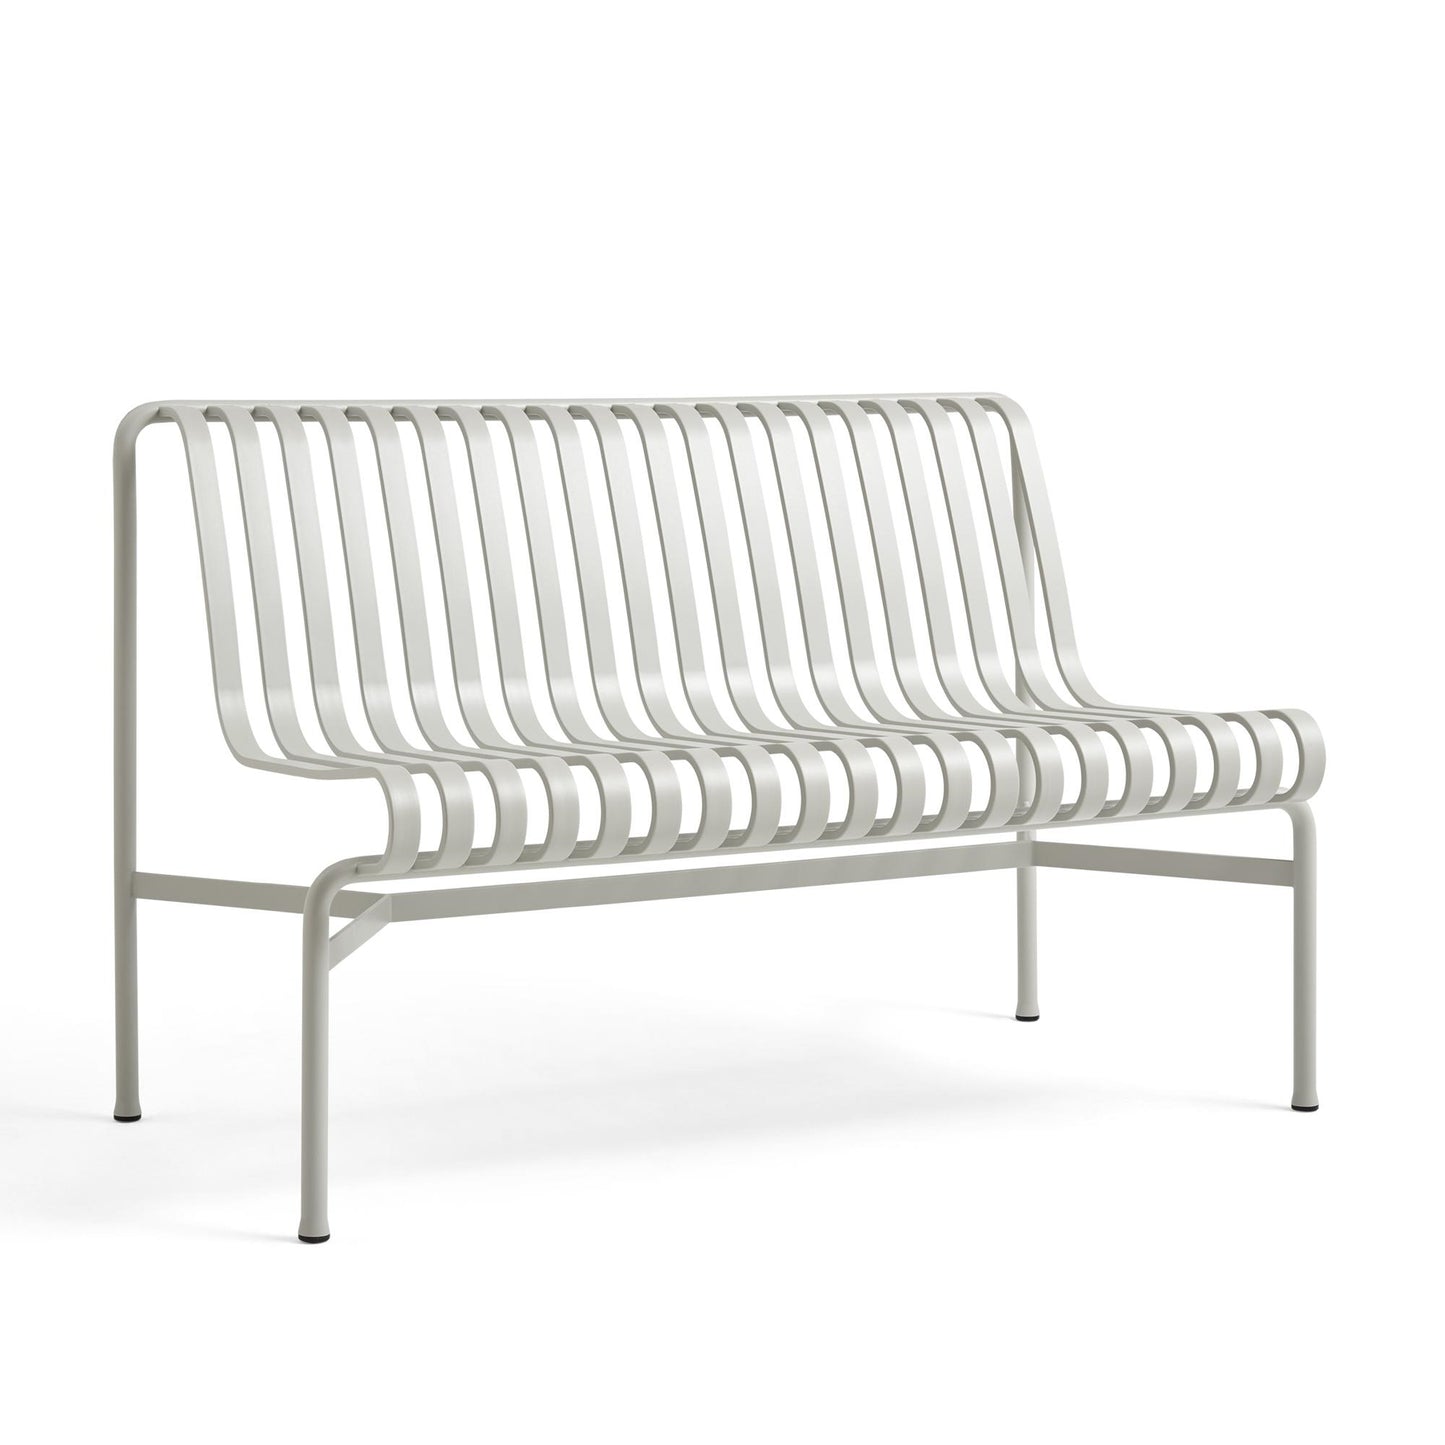 Palissade Dining Bench by HAY #Sky Gray